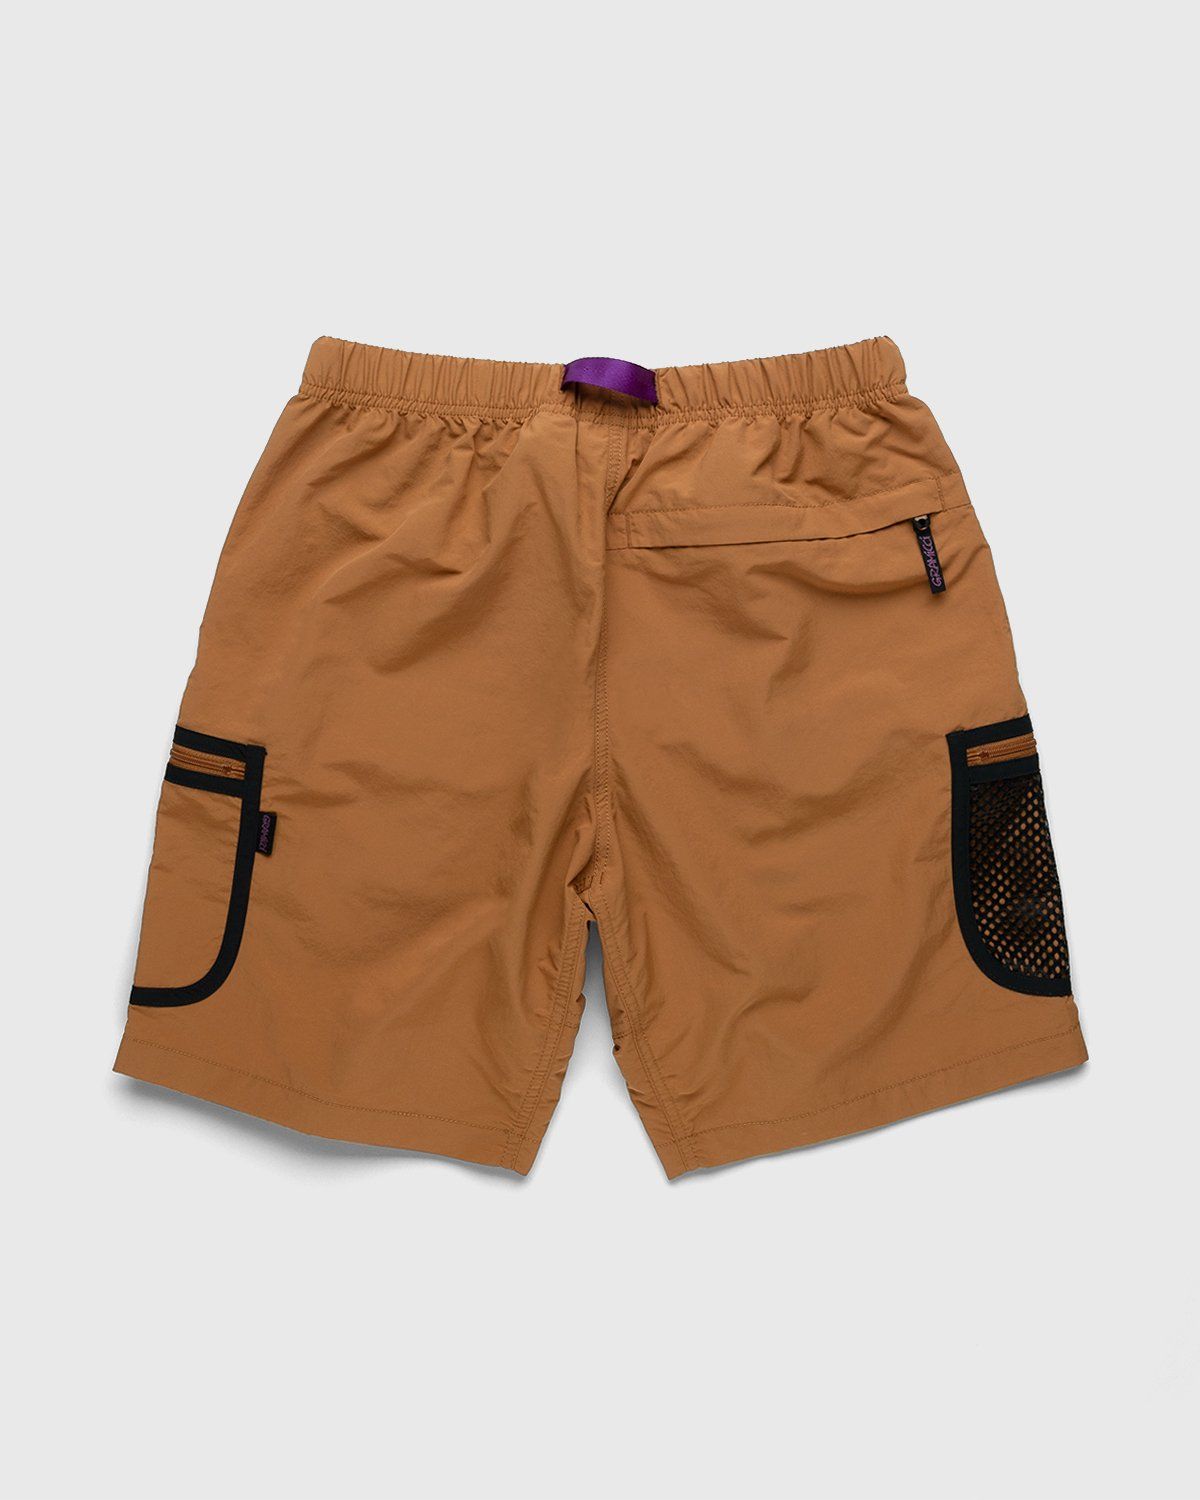 Gramicci x Highsnobiety – Shorts Rust - Active Shorts - Brown - Image 2